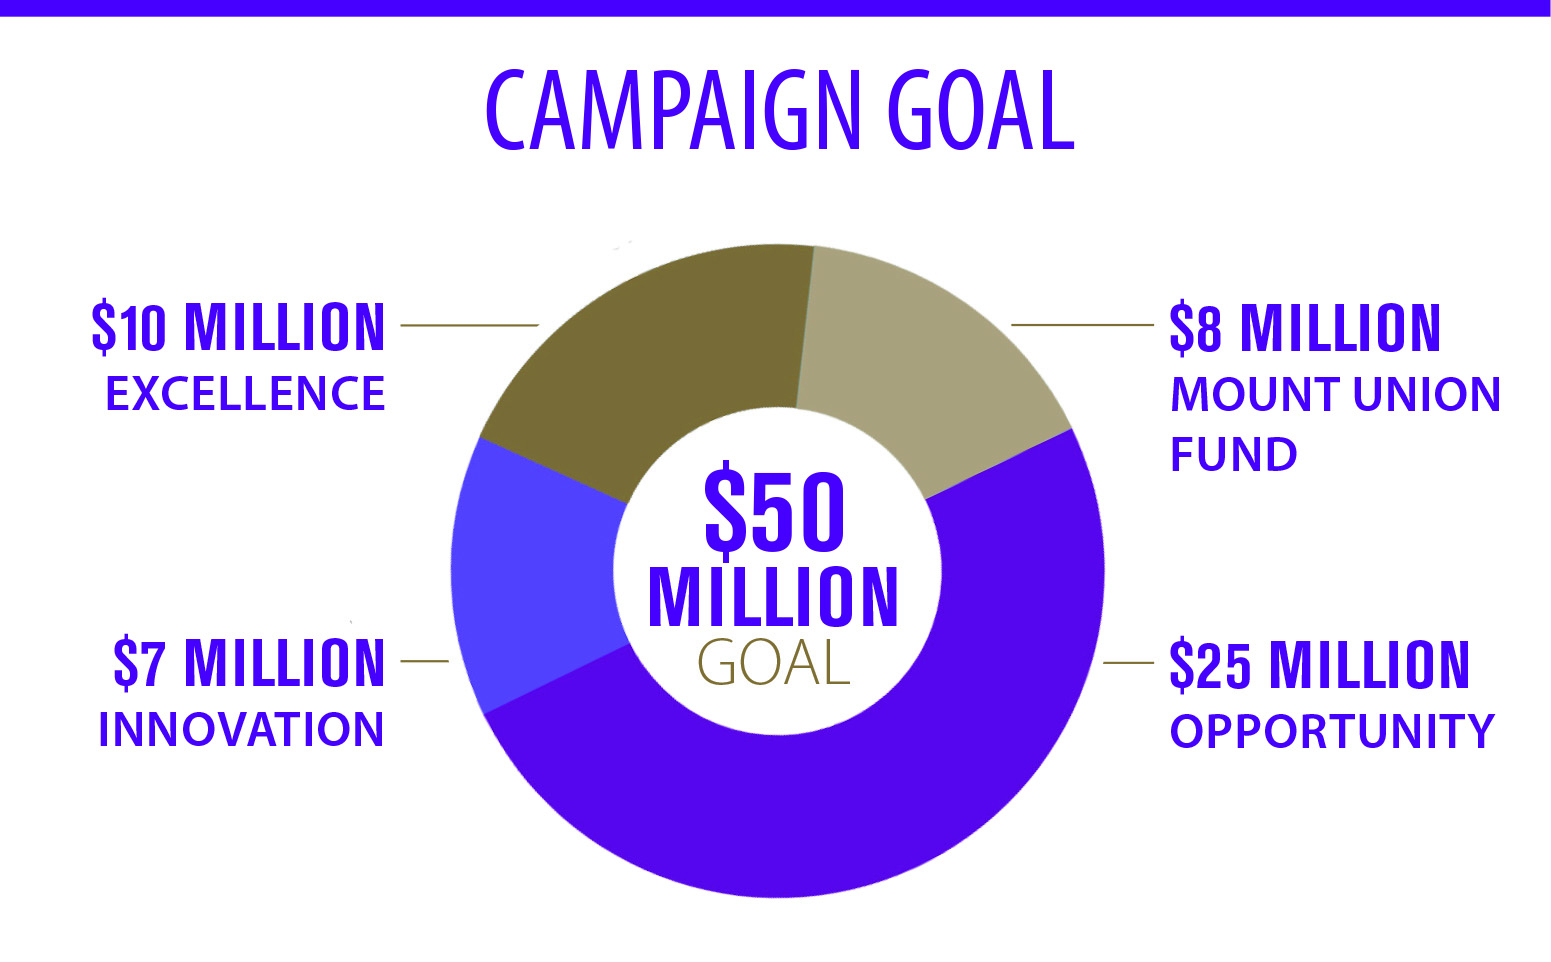 Chart showing the campaign goal of $50 and its breakdown